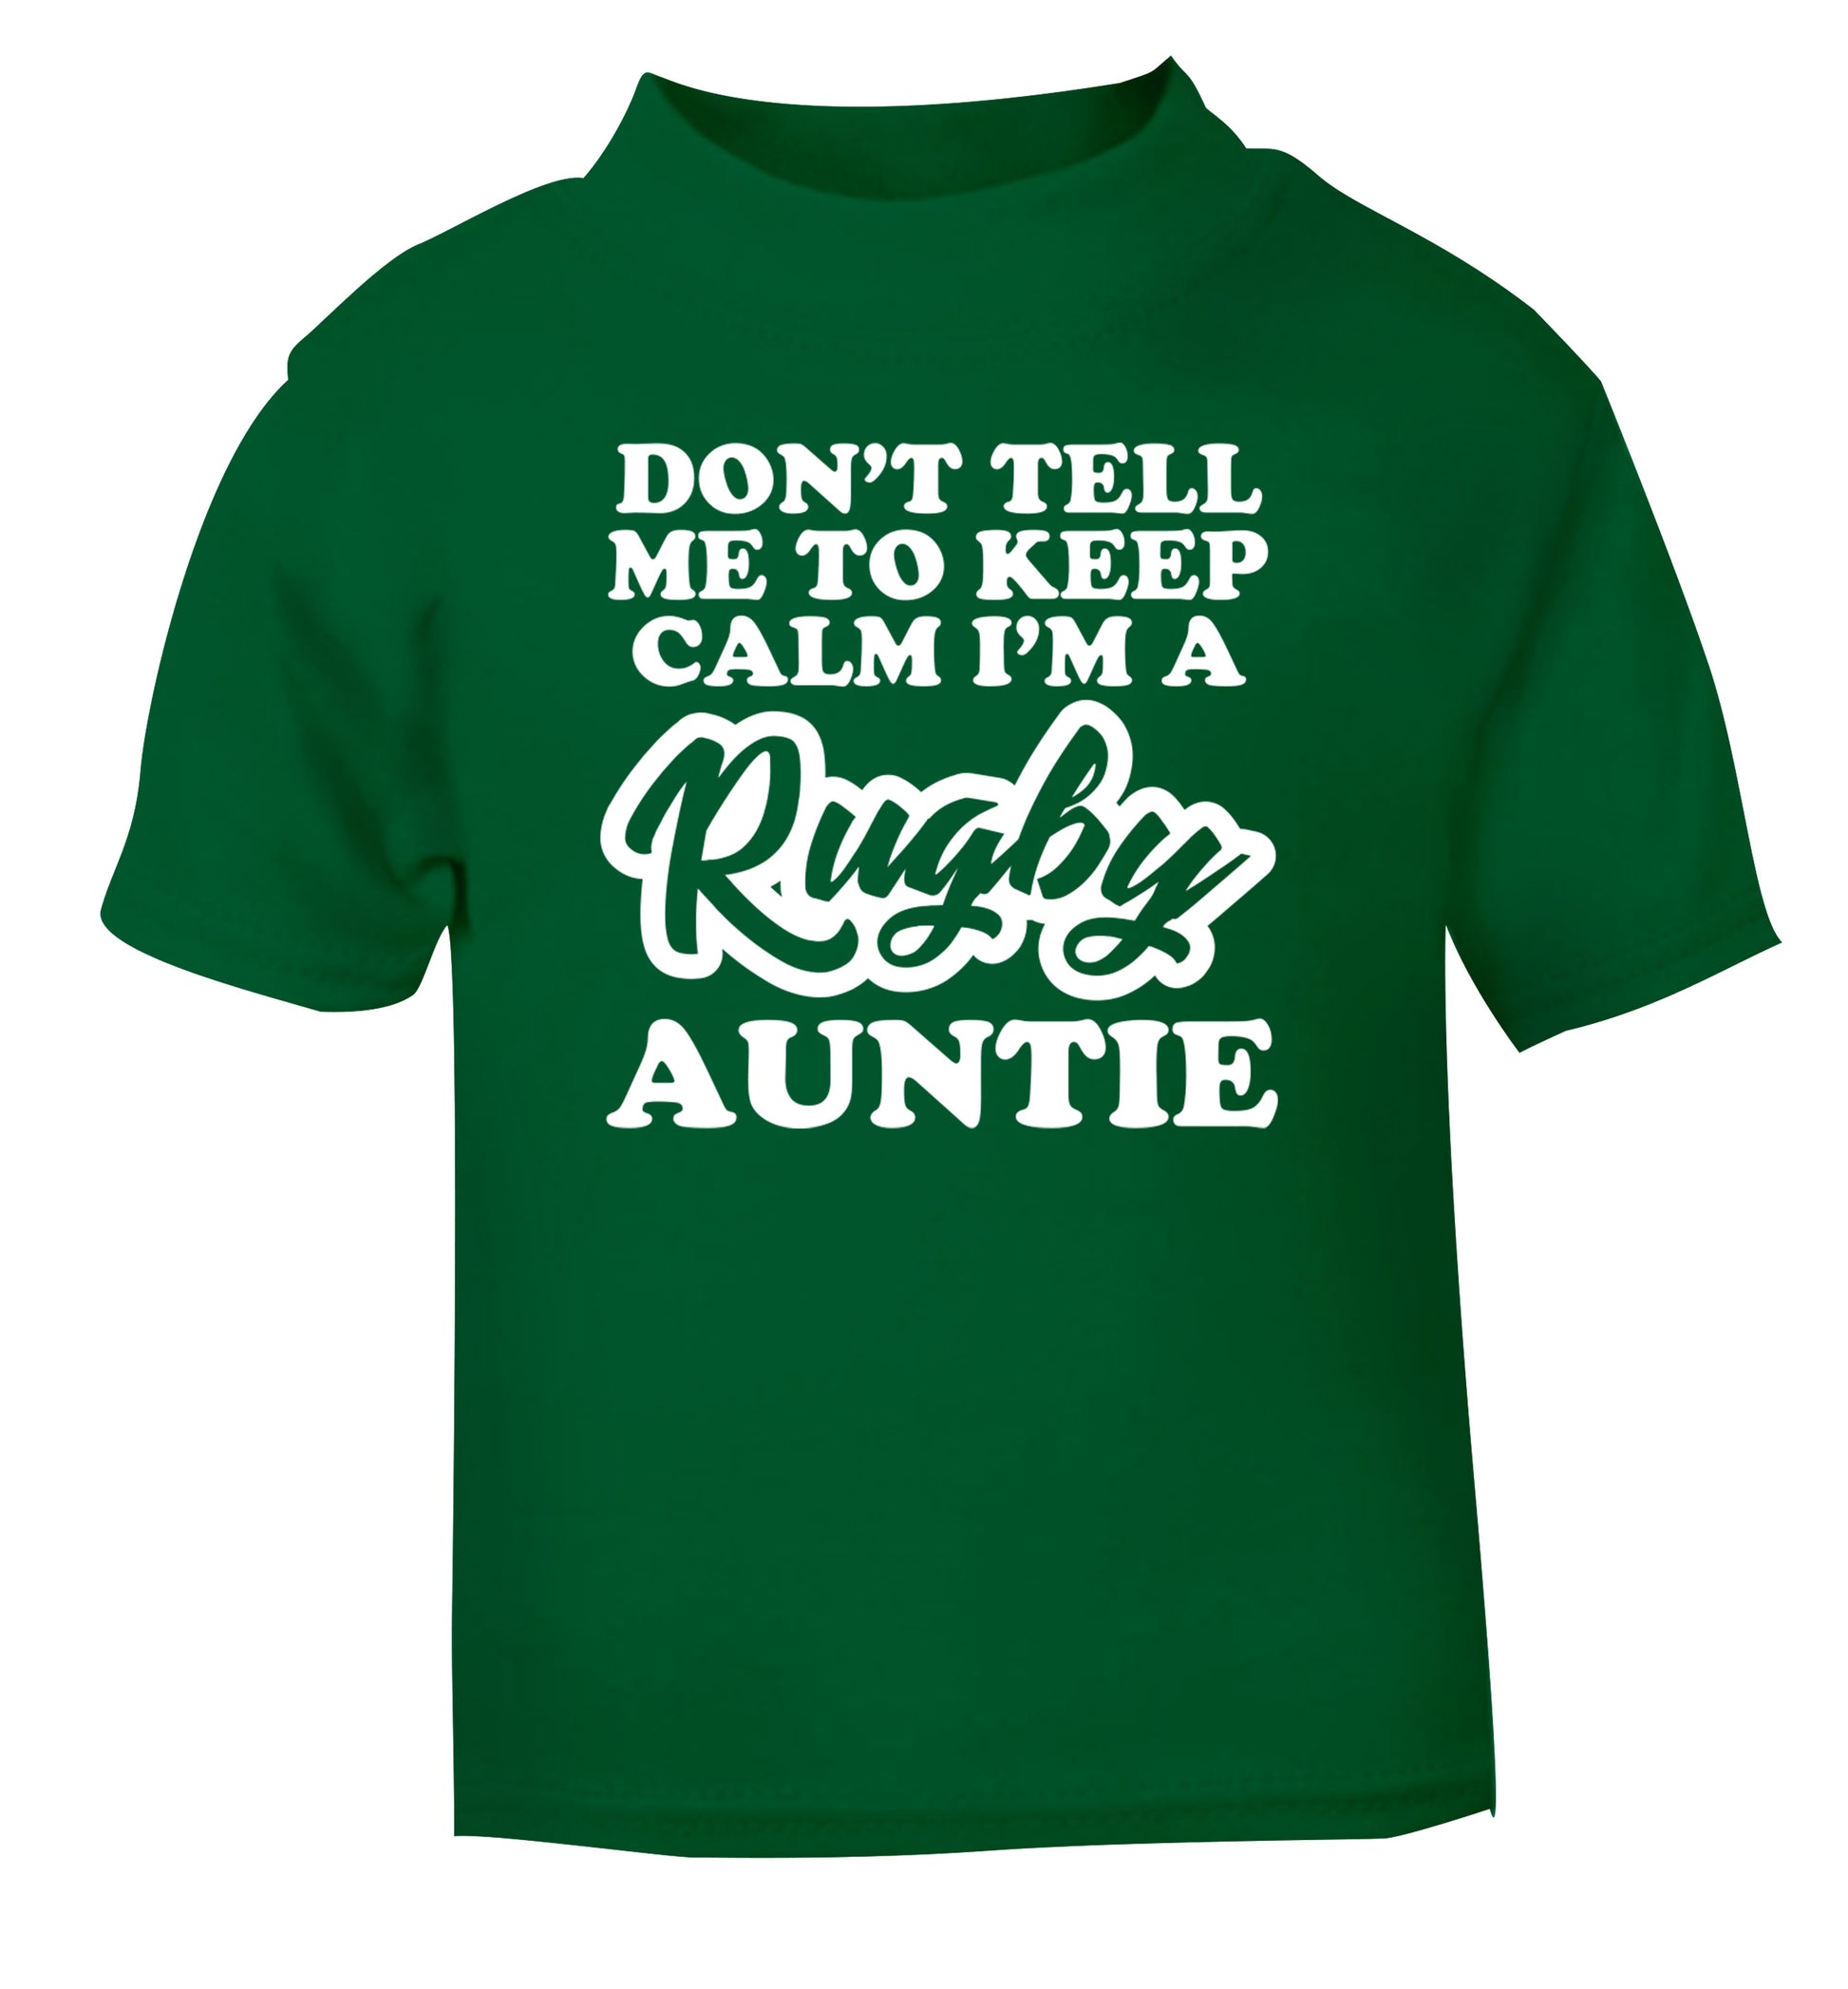 Don't tell me keep calm I'm a rugby auntie green Baby Toddler Tshirt 2 Years